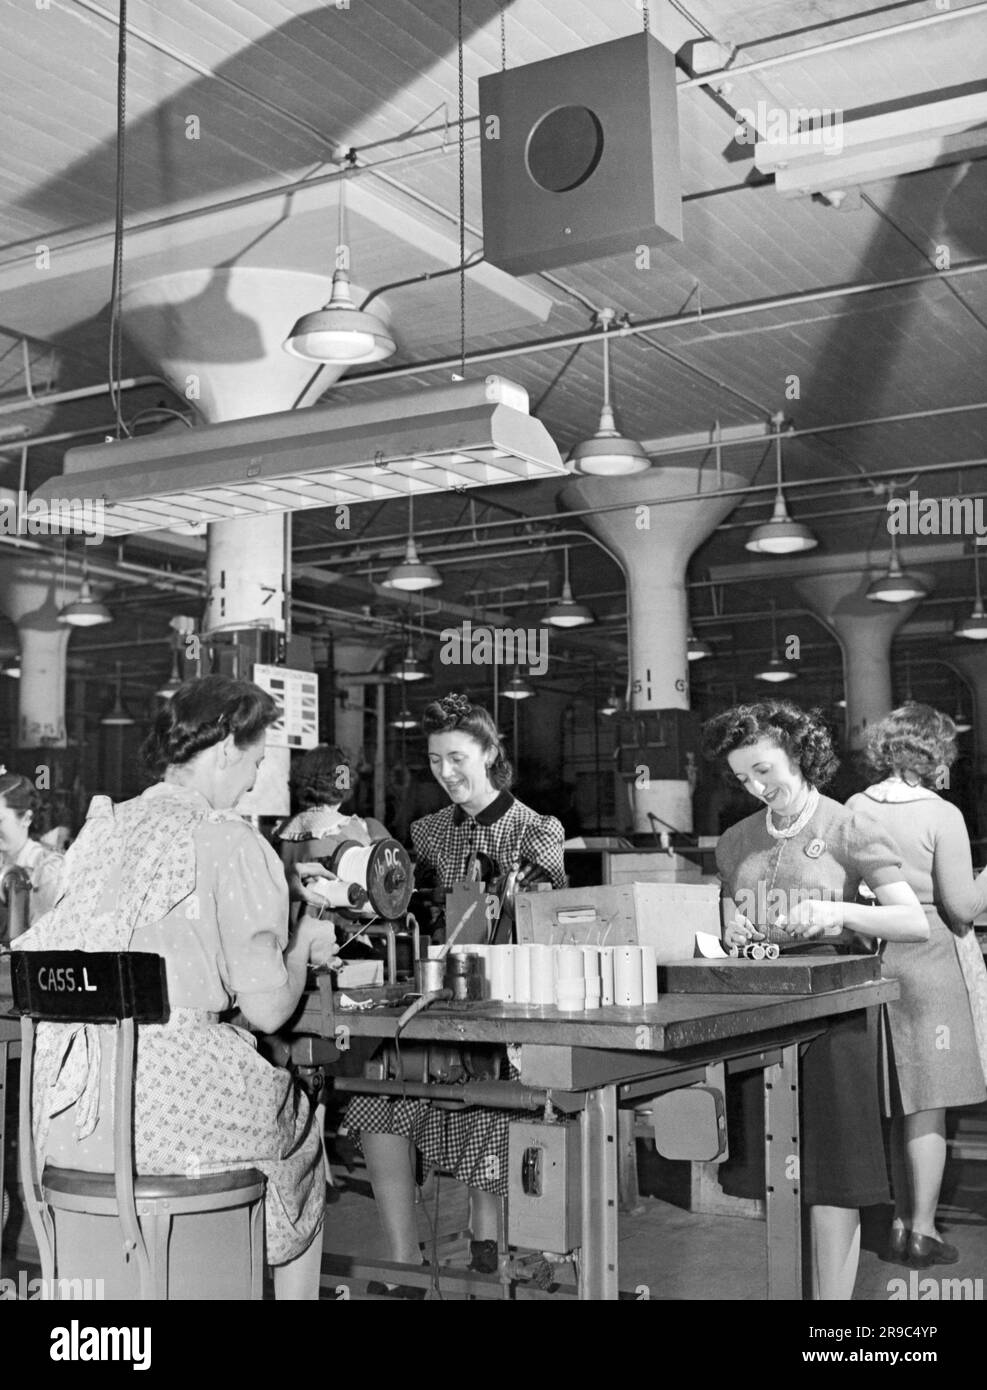 Camden, New Jersey:  c. 1944 Music is broadcast through the overhead speakers to raise employee morale and bring relief to workers on repetitive tasks on this assembly line at a RCA Victor plant. Stock Photo